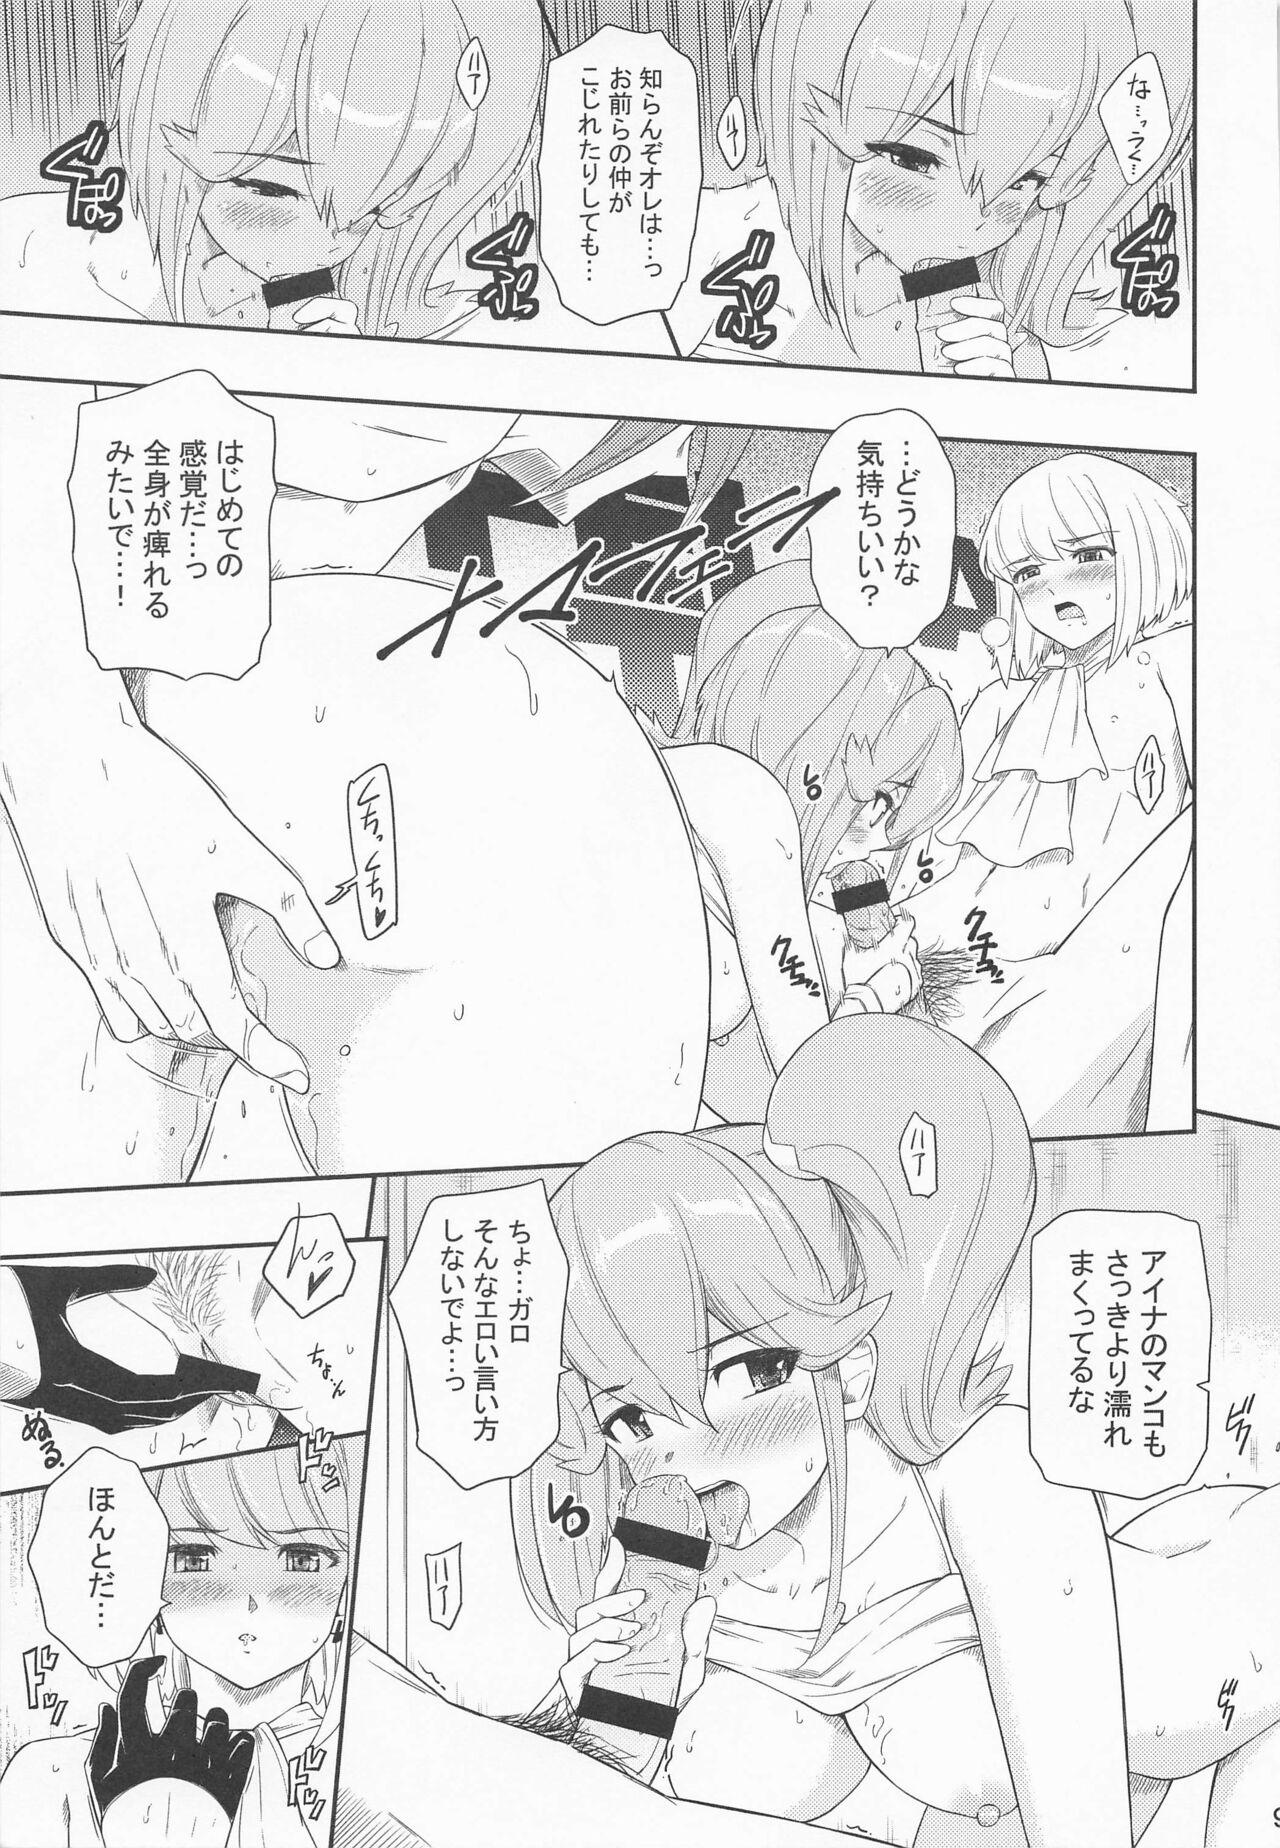 Stockings EROMARE - Suddenly 3P sex is happening... - Promare Secret - Page 8